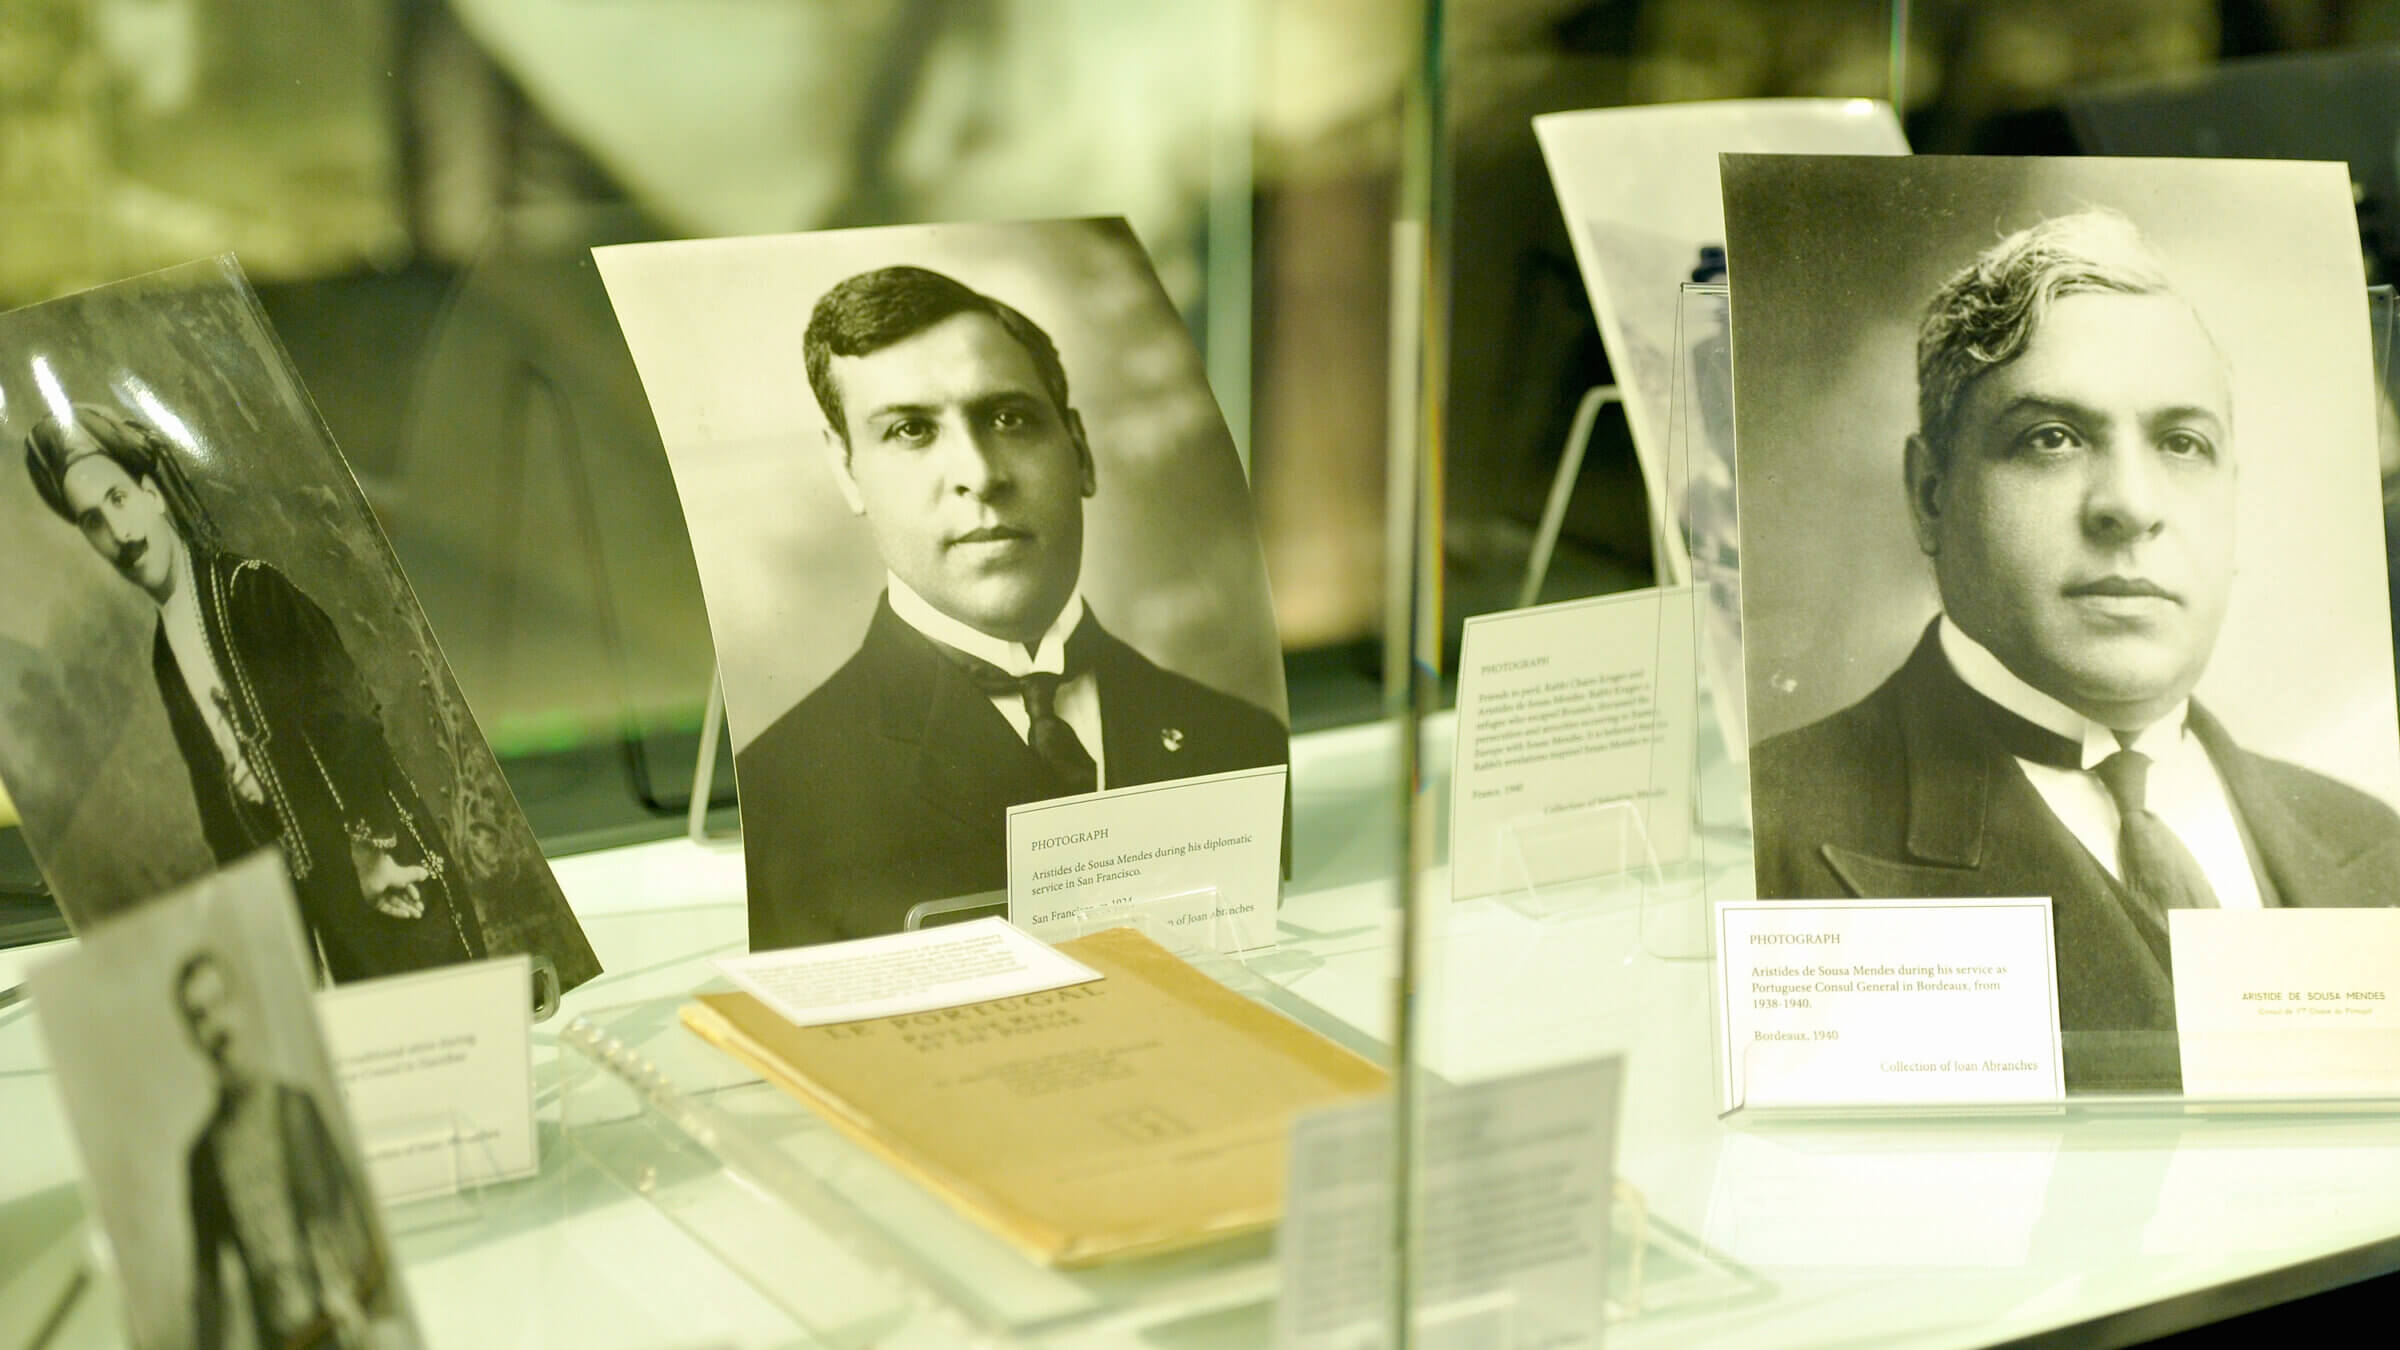 Photos of Aristides de Sousa Mendes from a Sousa Mendes Foundation exhibition at the Los Angeles Museum of the Holocaust.